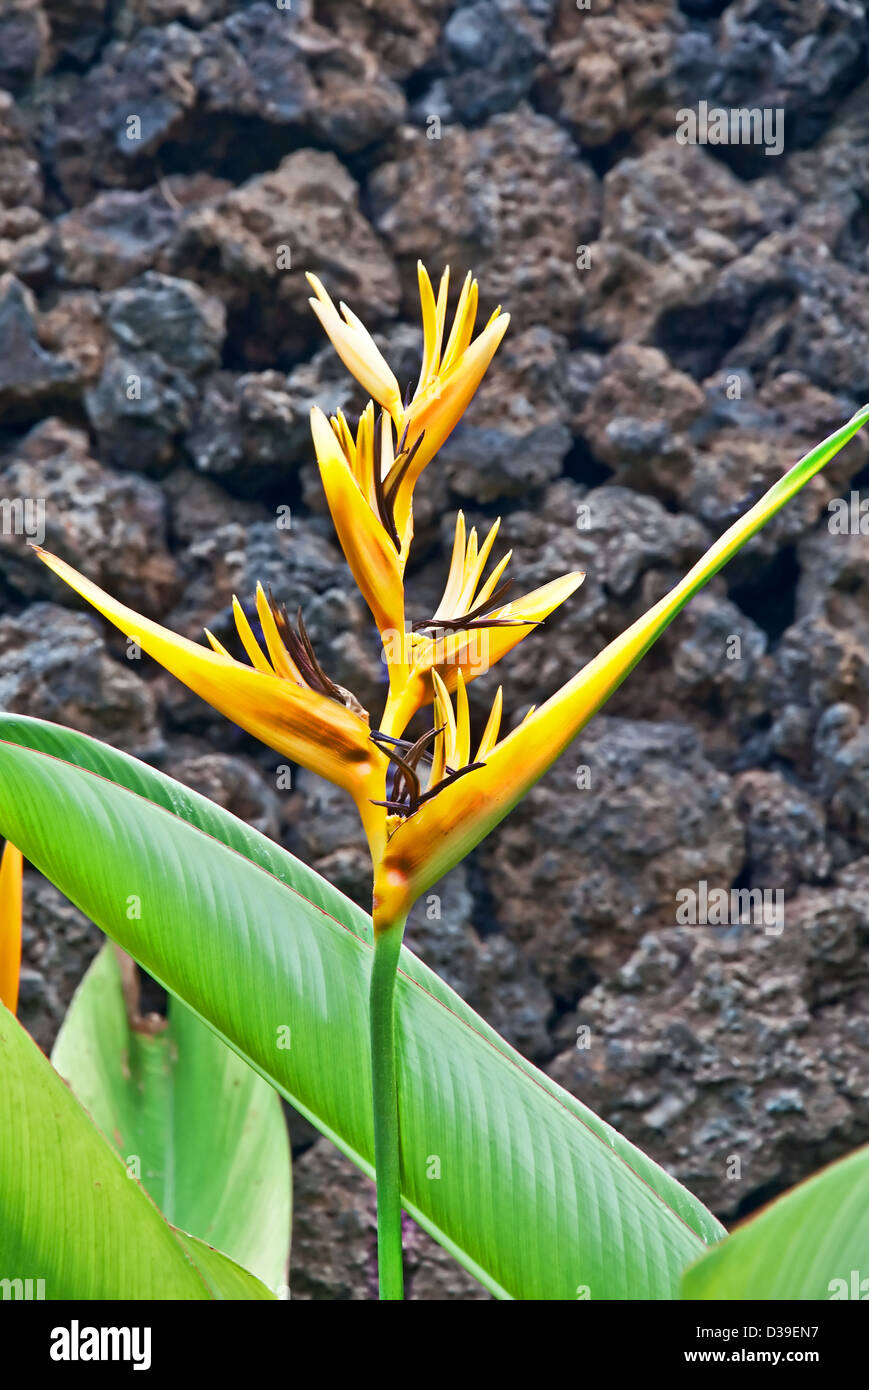 This yellow tropical flower is a Heliconia, or H. psittacorum Parrot Heliconia is set against a wall of lava rock in the backgro Stock Photo